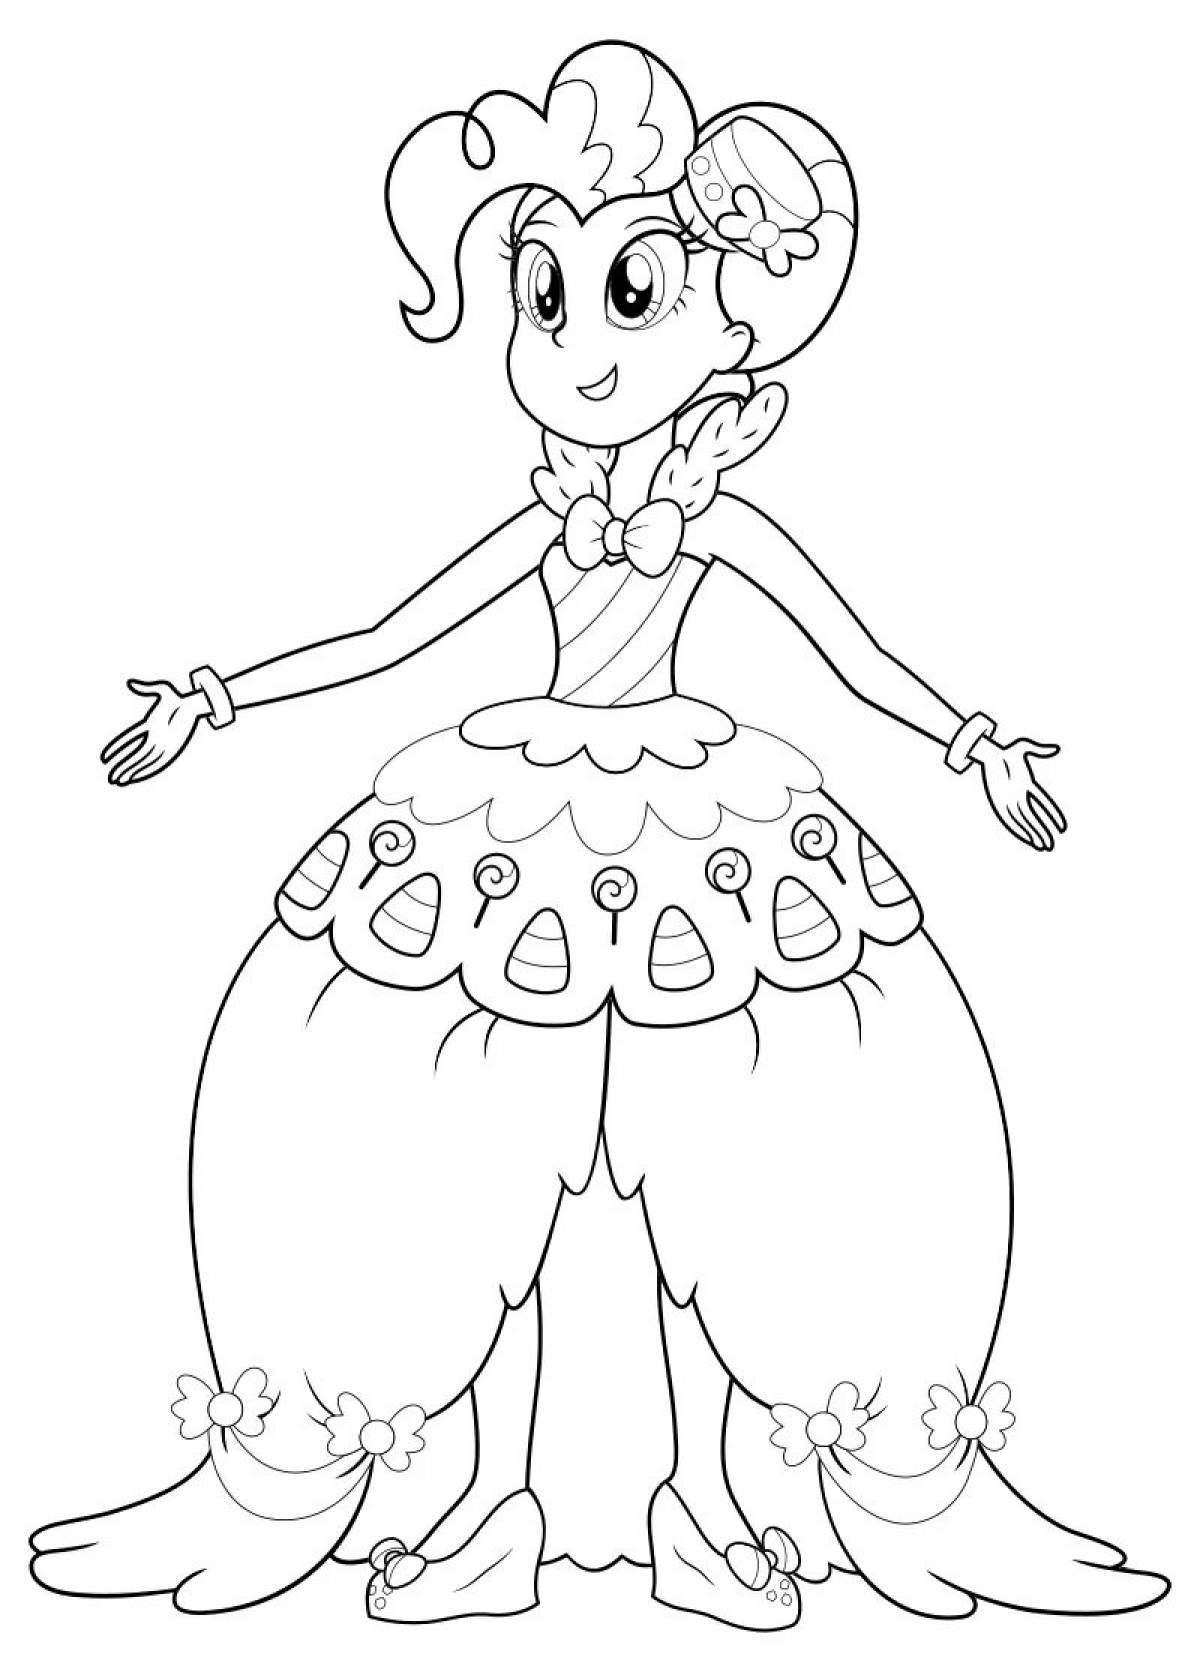 Coloring page enthusiastic pinkie pie